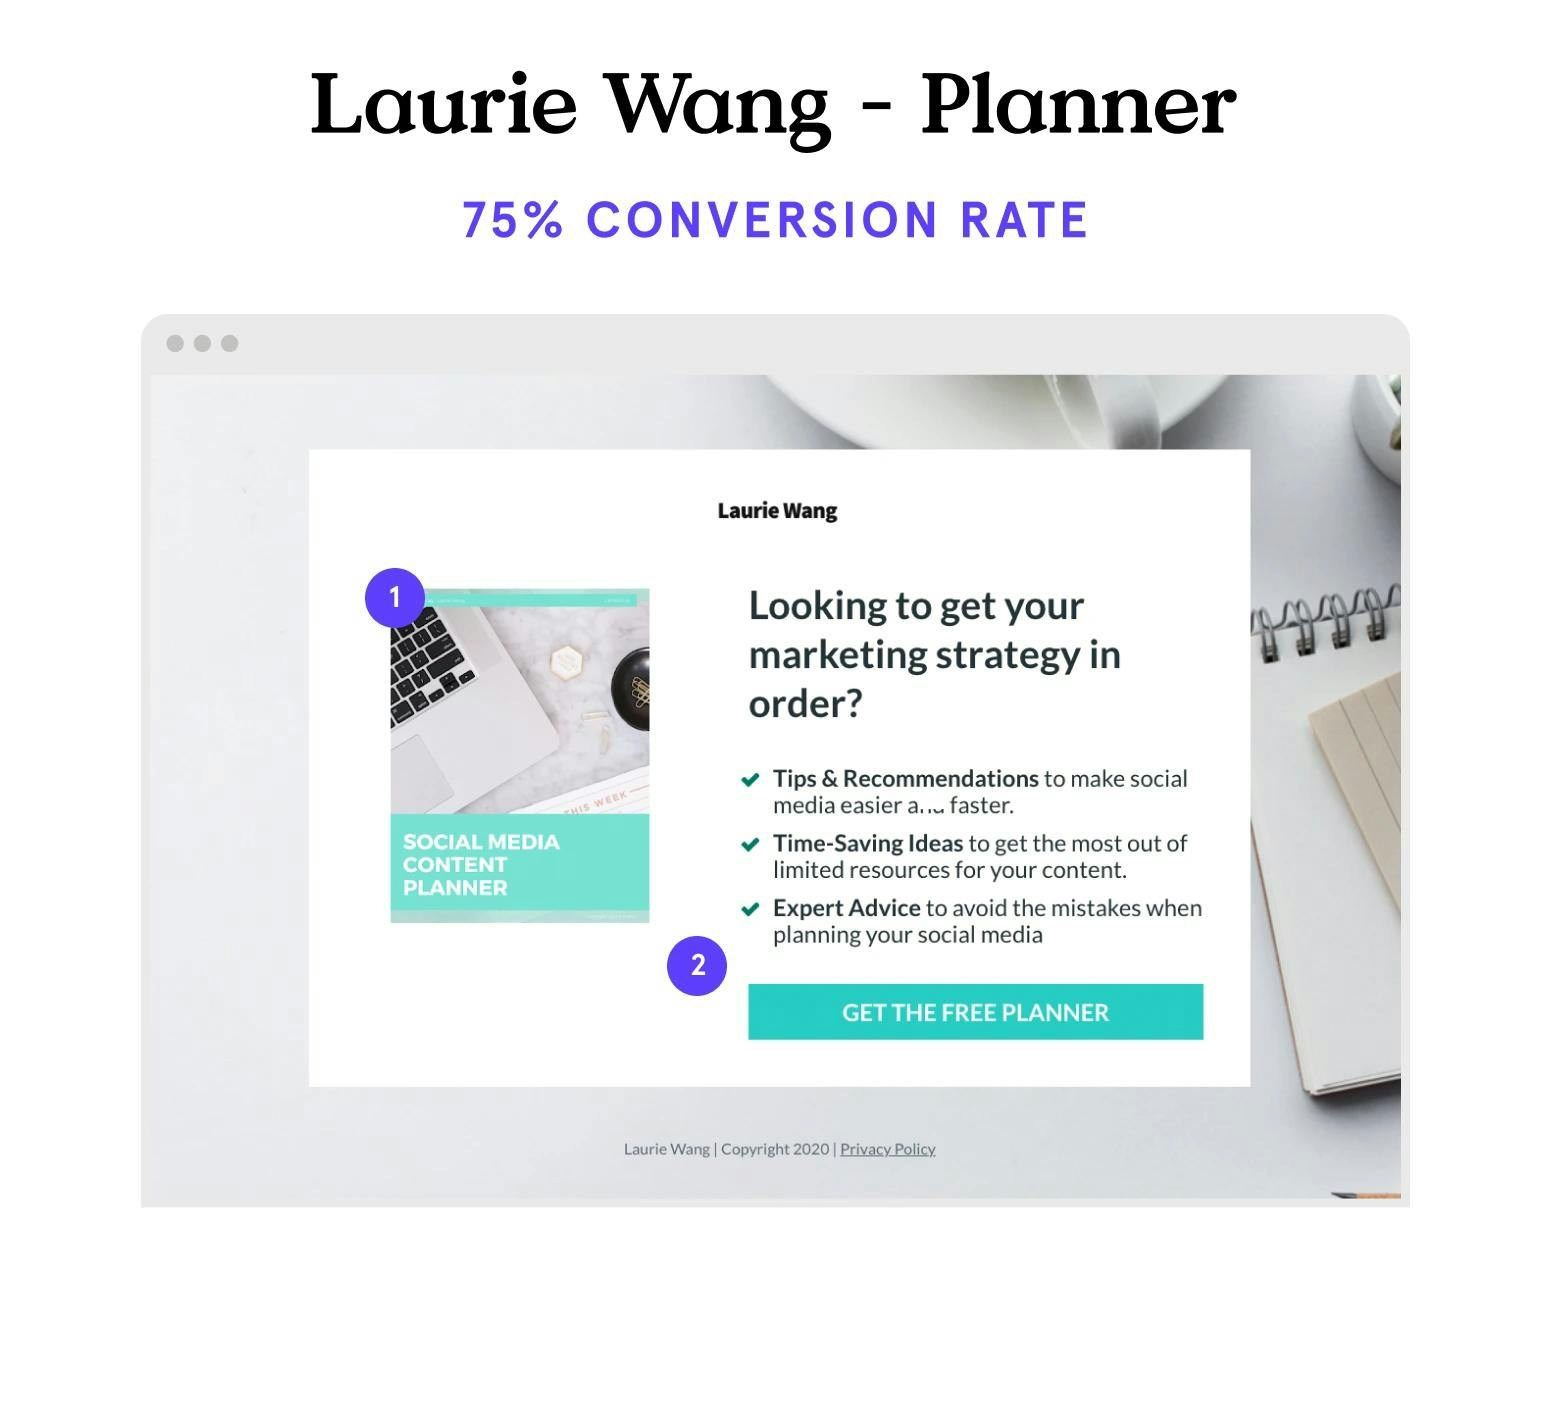 Free planner lead generation landing page example